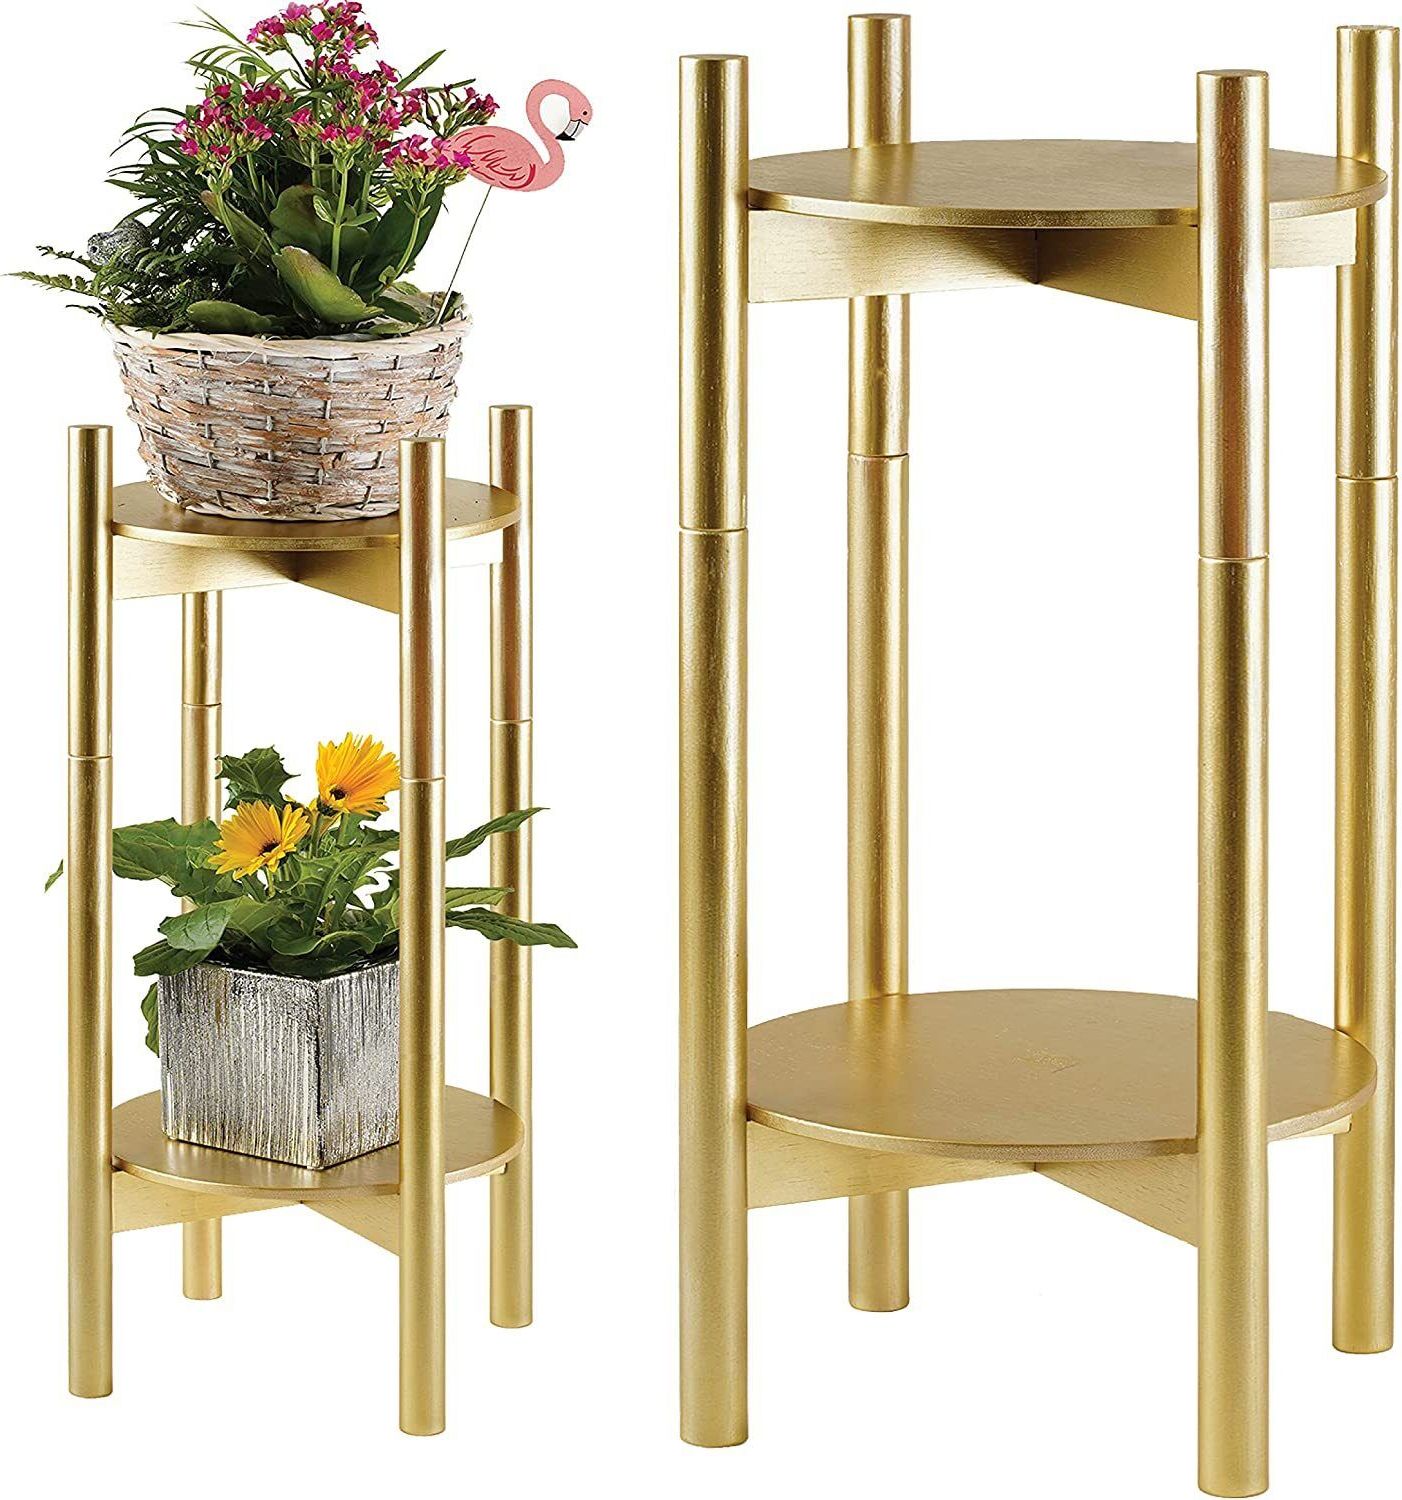 Ebay For 5 Inch Plant Stands (View 9 of 15)